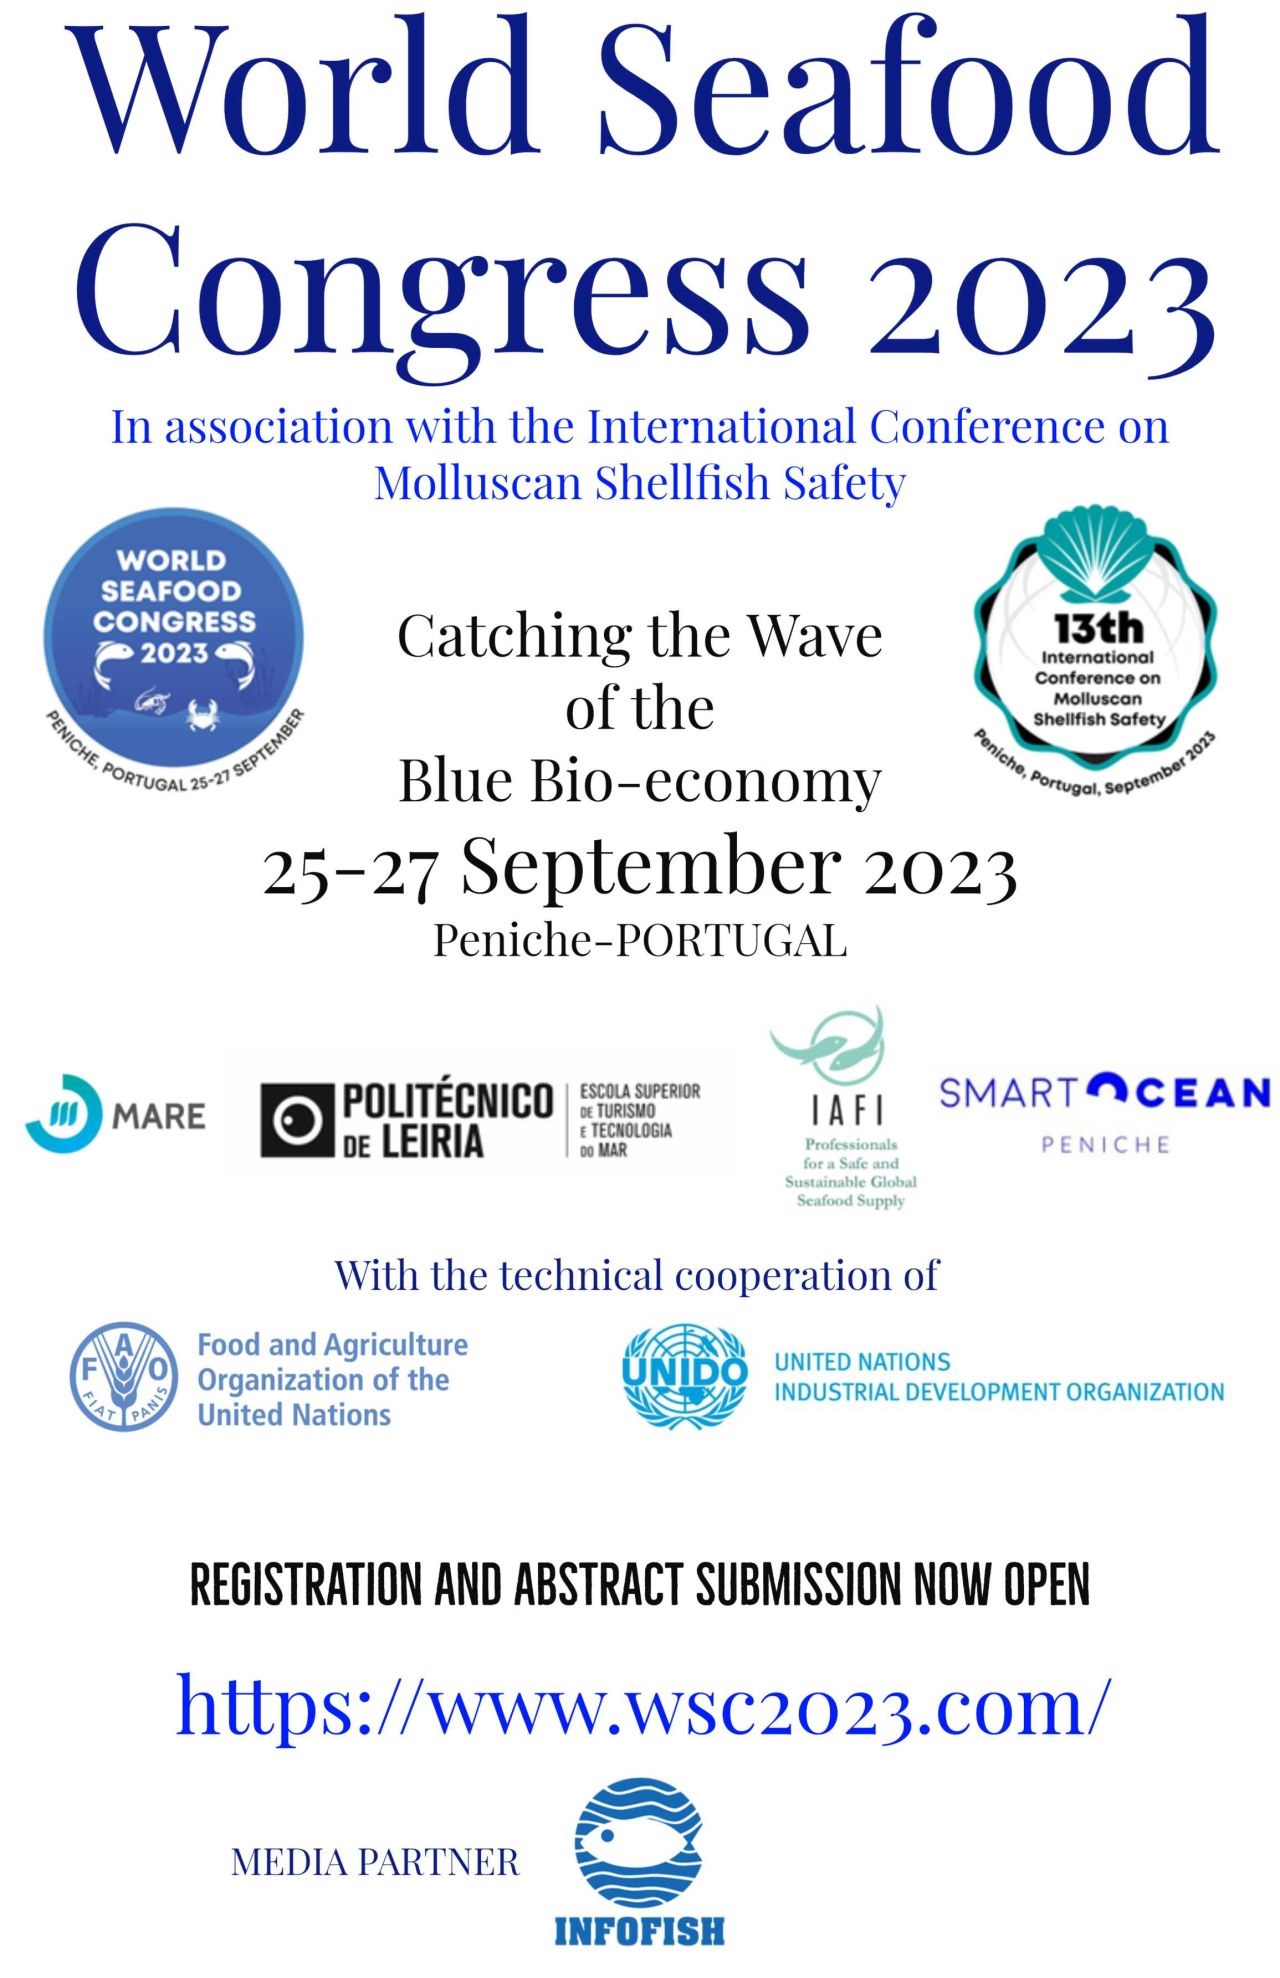 World Seafood Congress 2023 in association with the International Conference on Molluscan Seafood Safety Catching the Wave of the Blue Bio-Economy 25-27 September 2023, Peniche, Portugal Registration and abstract submission now open at www.wsc2023.com